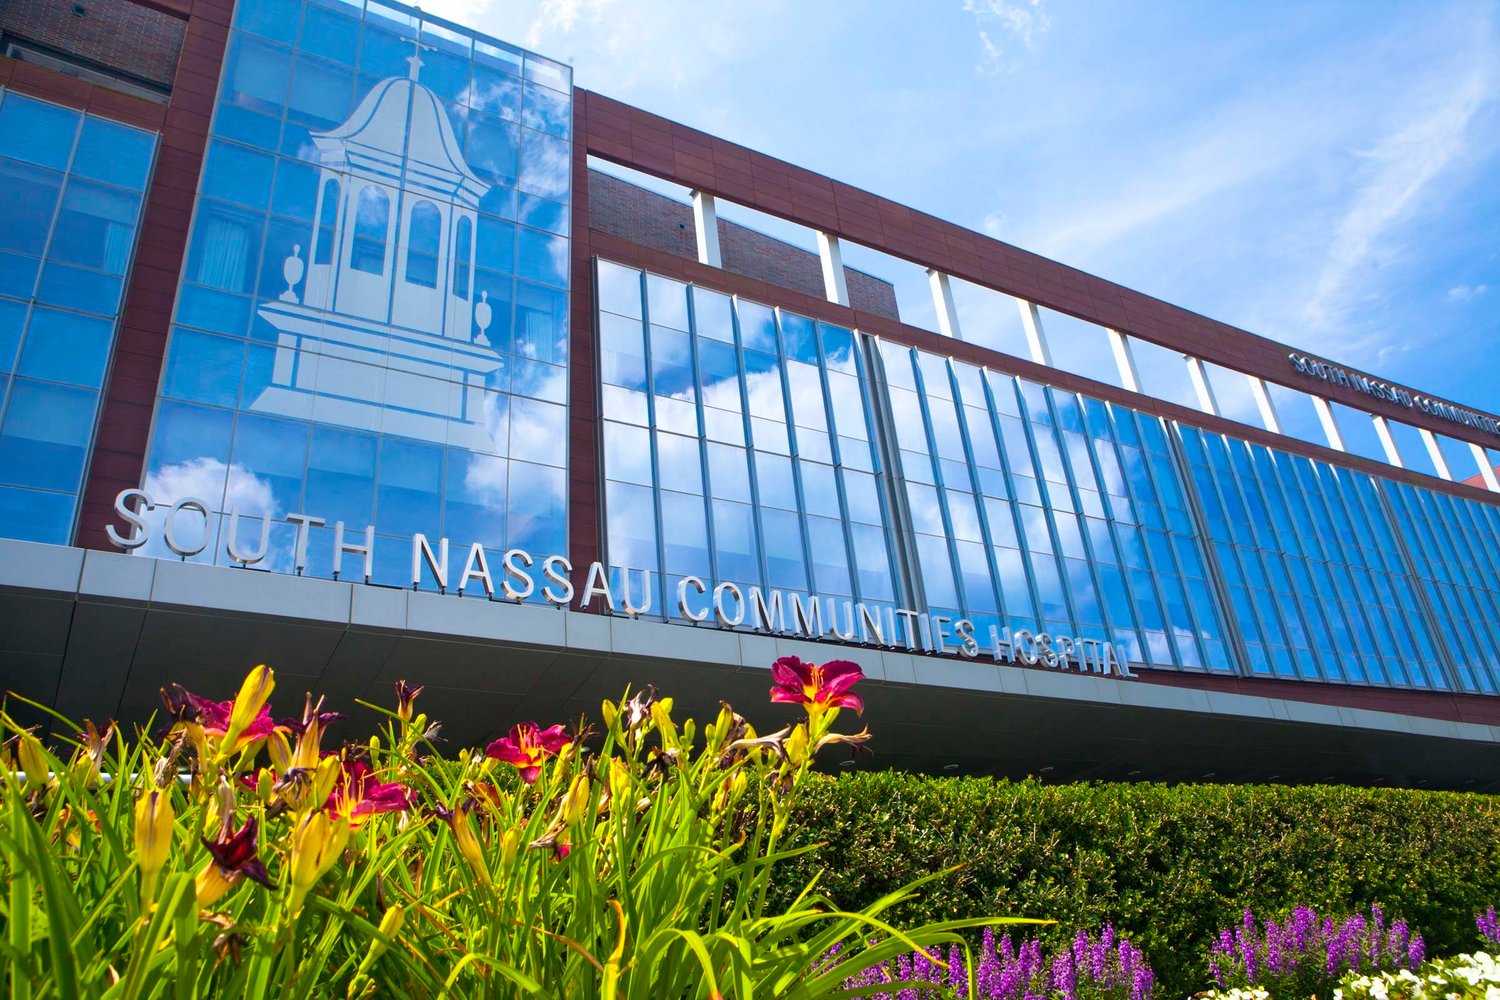 U.S. News and World Report ranked South Nassau Communities Hospital 20th in New York’s metropolitan area. Its urology department ranked 35th in country.